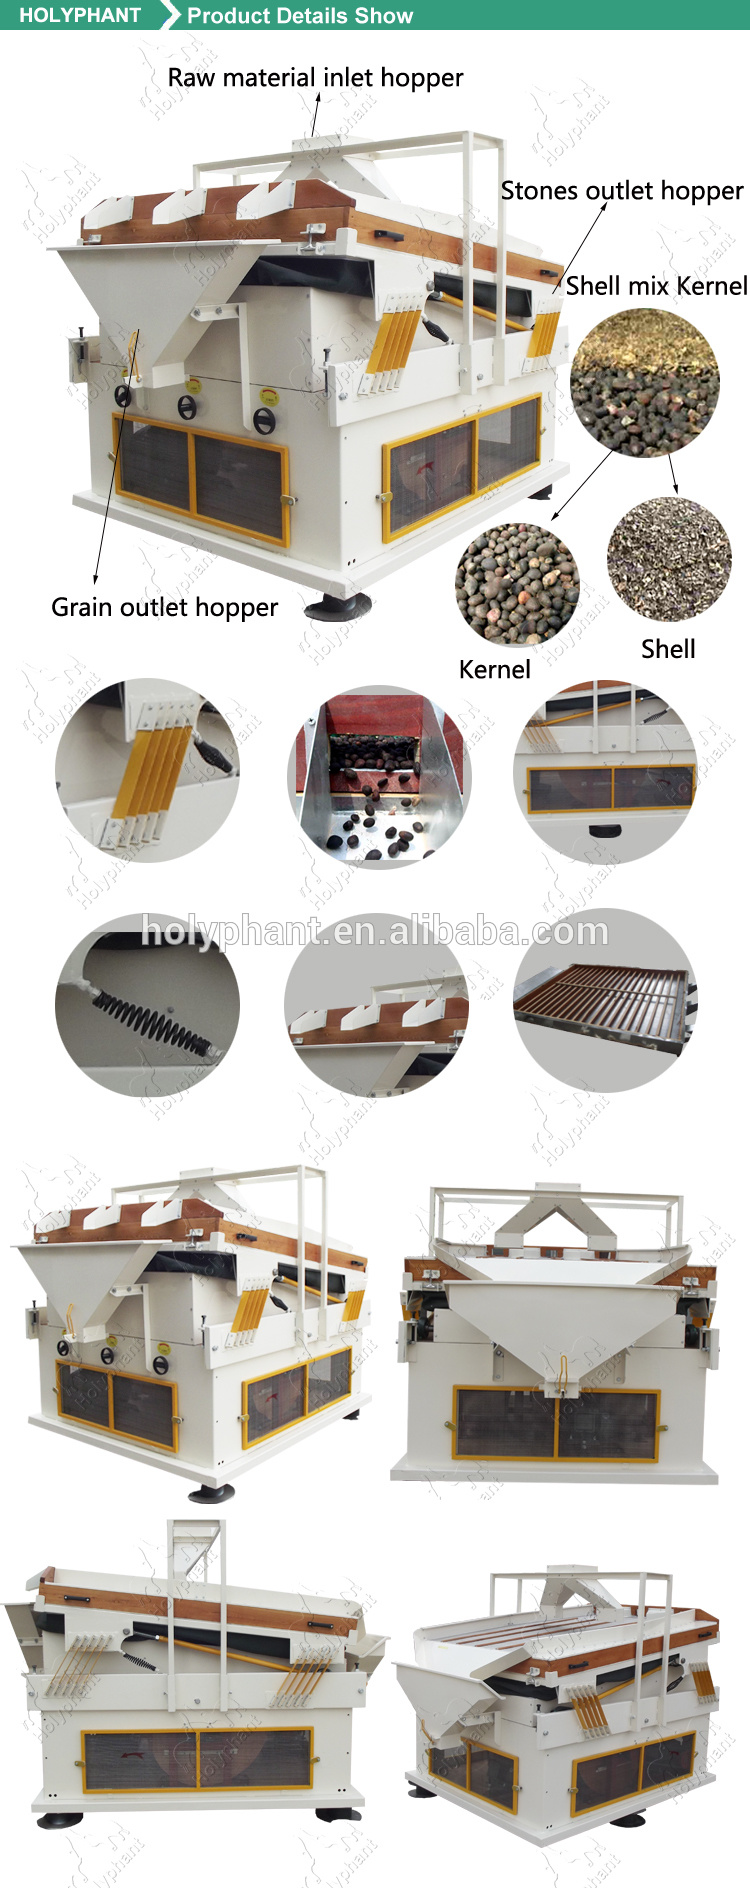 Palm Kernel Shell Separator for Sale Palm Kernel Almond Shell Separator Apricot Kernels Shell